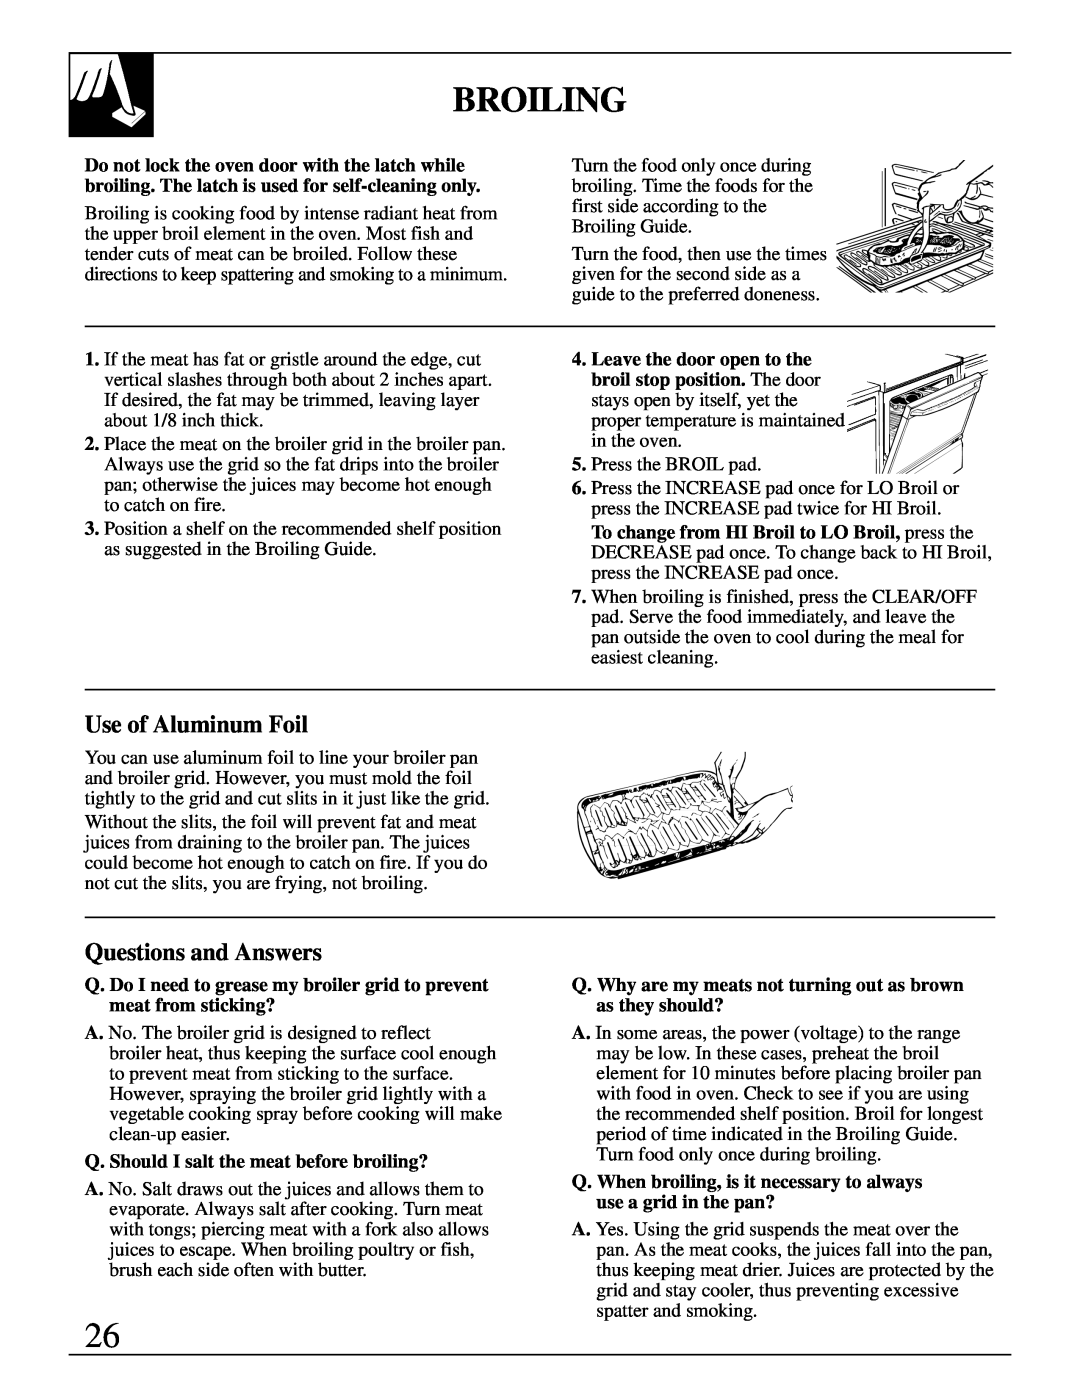 GE 10-95 CG warranty Broiling, Use of Aluminum Foil, Questions and Answers, Q. Should I salt the meat before broiling? 